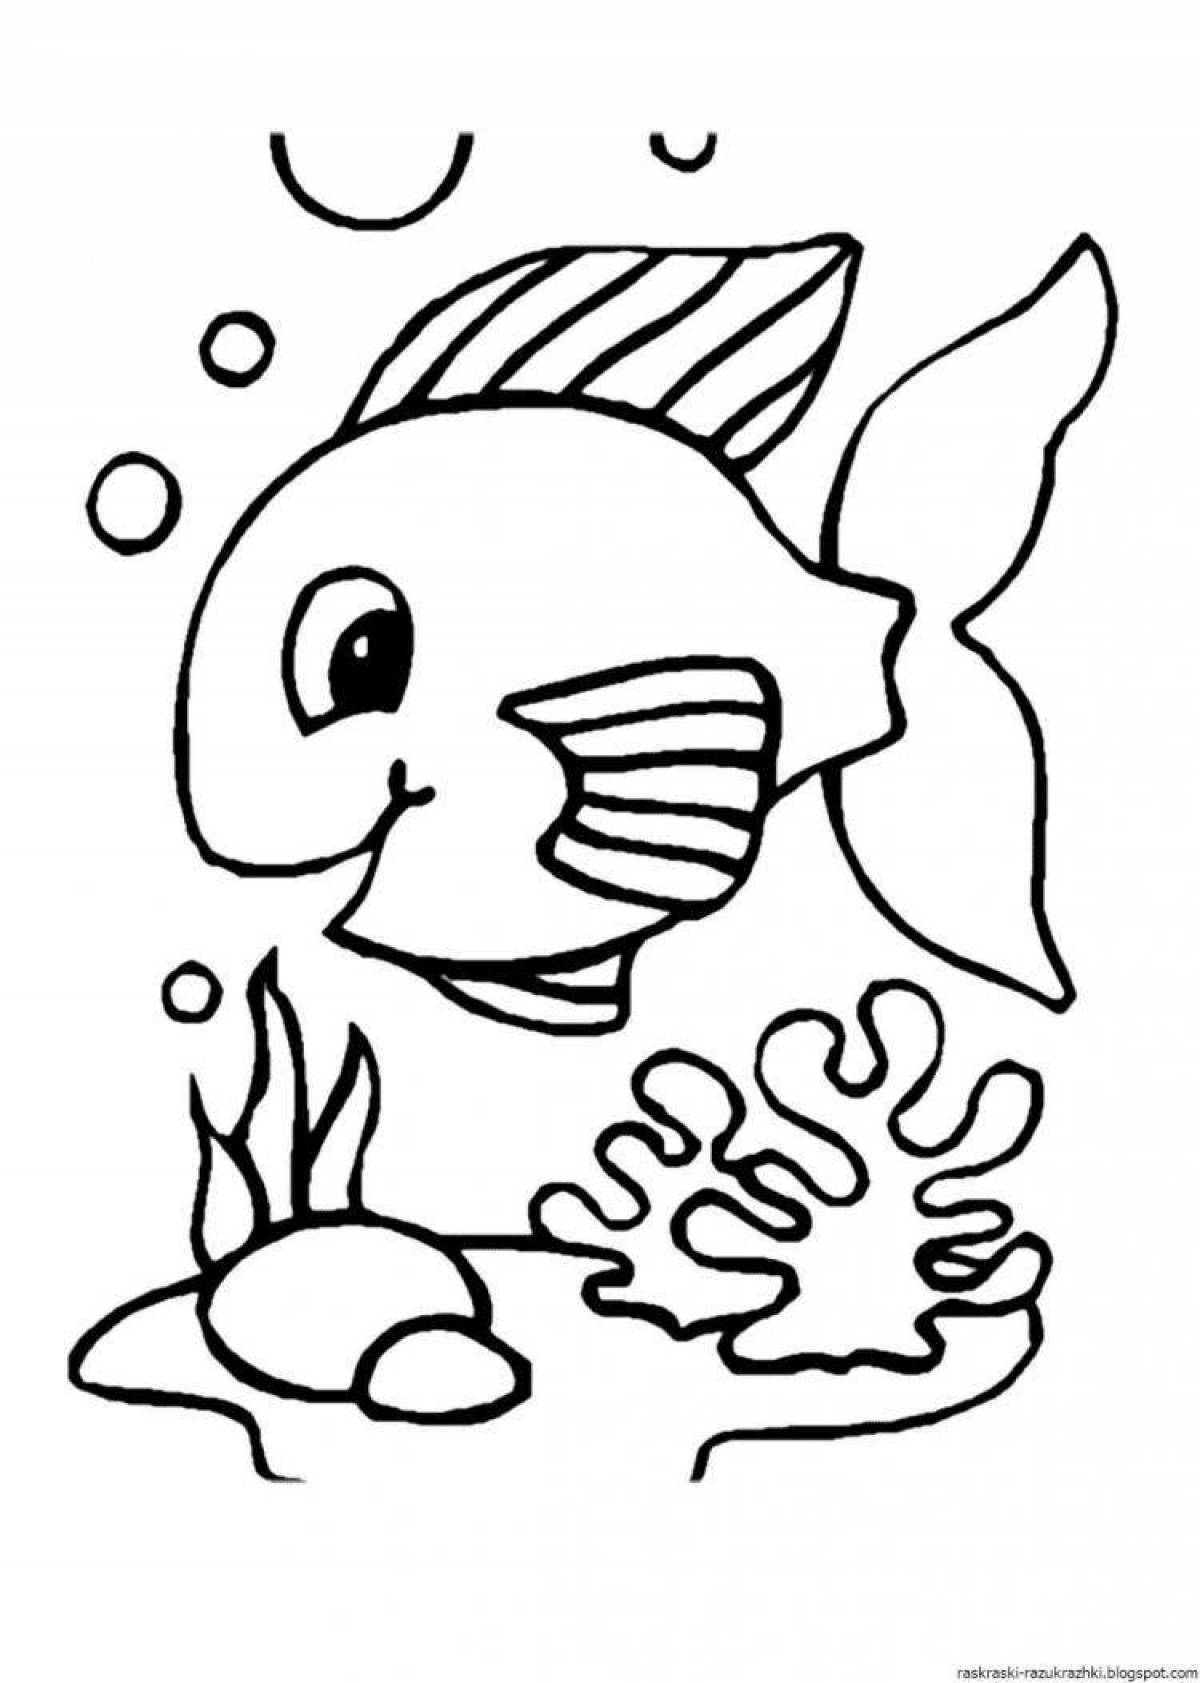 Awesome fish coloring pages for 5-6 year olds